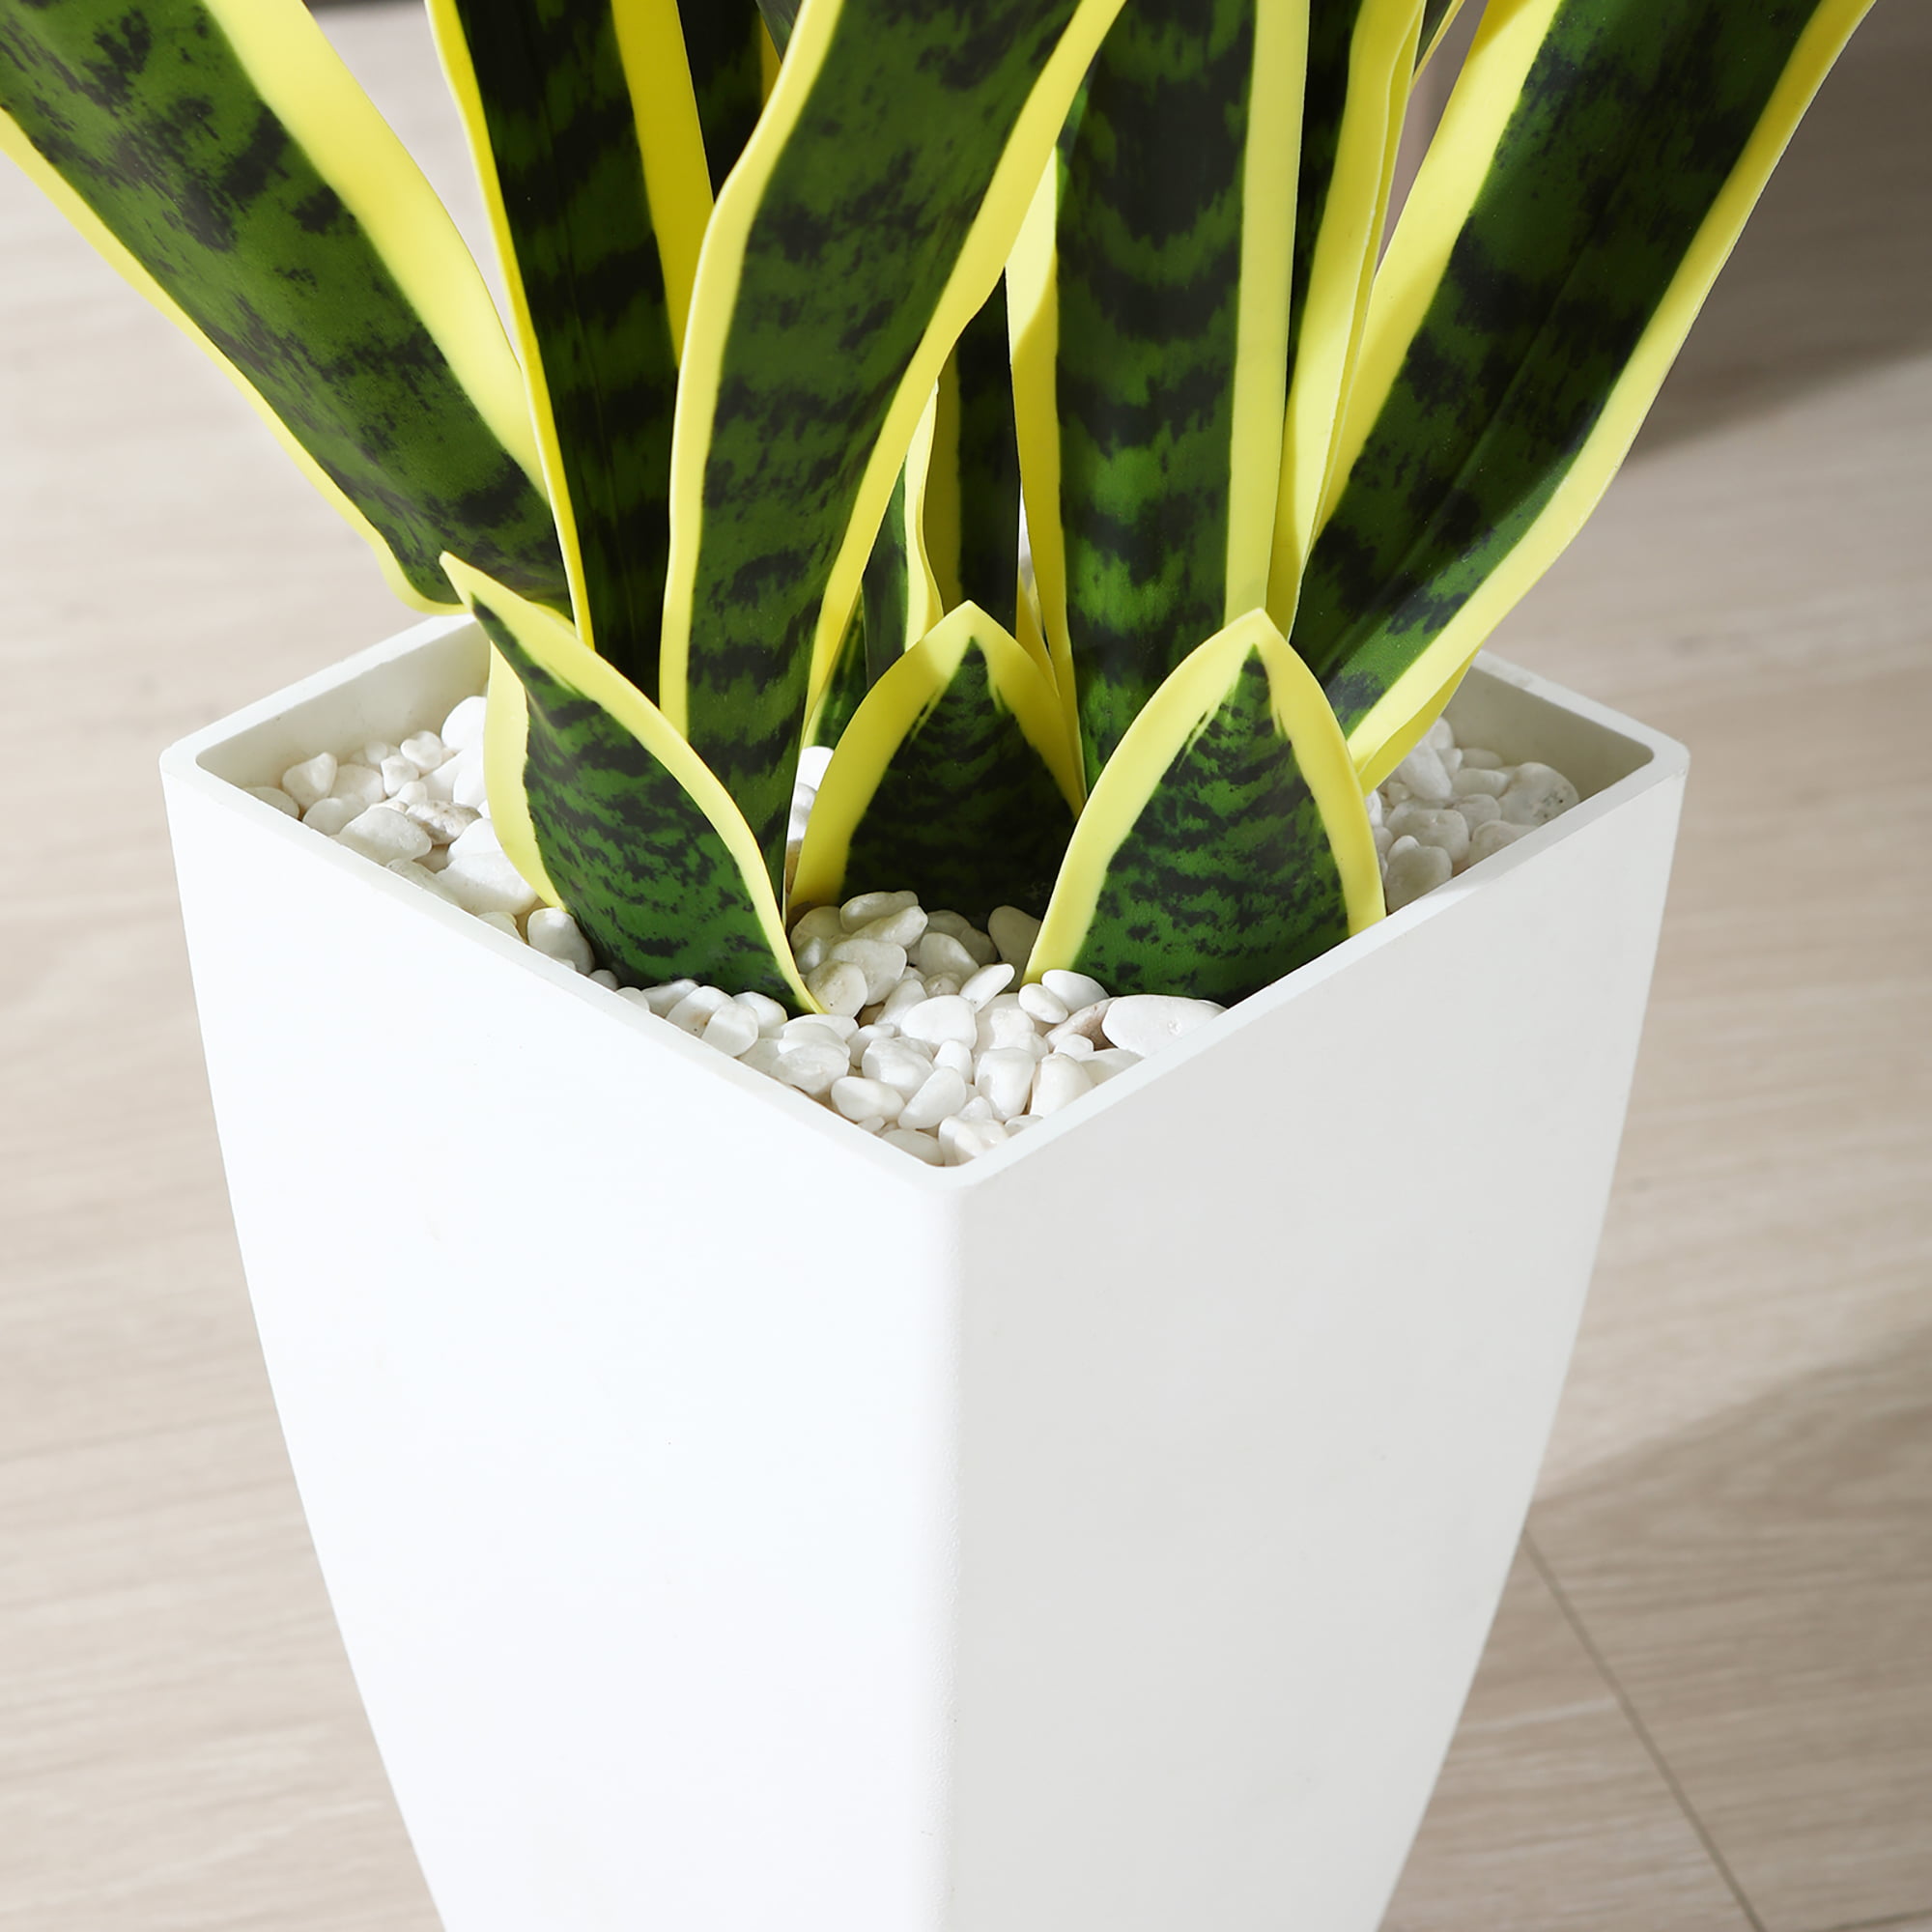  DUZYXI Artificial Snake Plant 16 with White Ceramic Pot  Sansevieria Plant Fake Snake Plant Greenery Faux Plant in Pot for Home  Office Living Room Housewarming Gifts Indoor Outdoor Decor-Yellow : Home